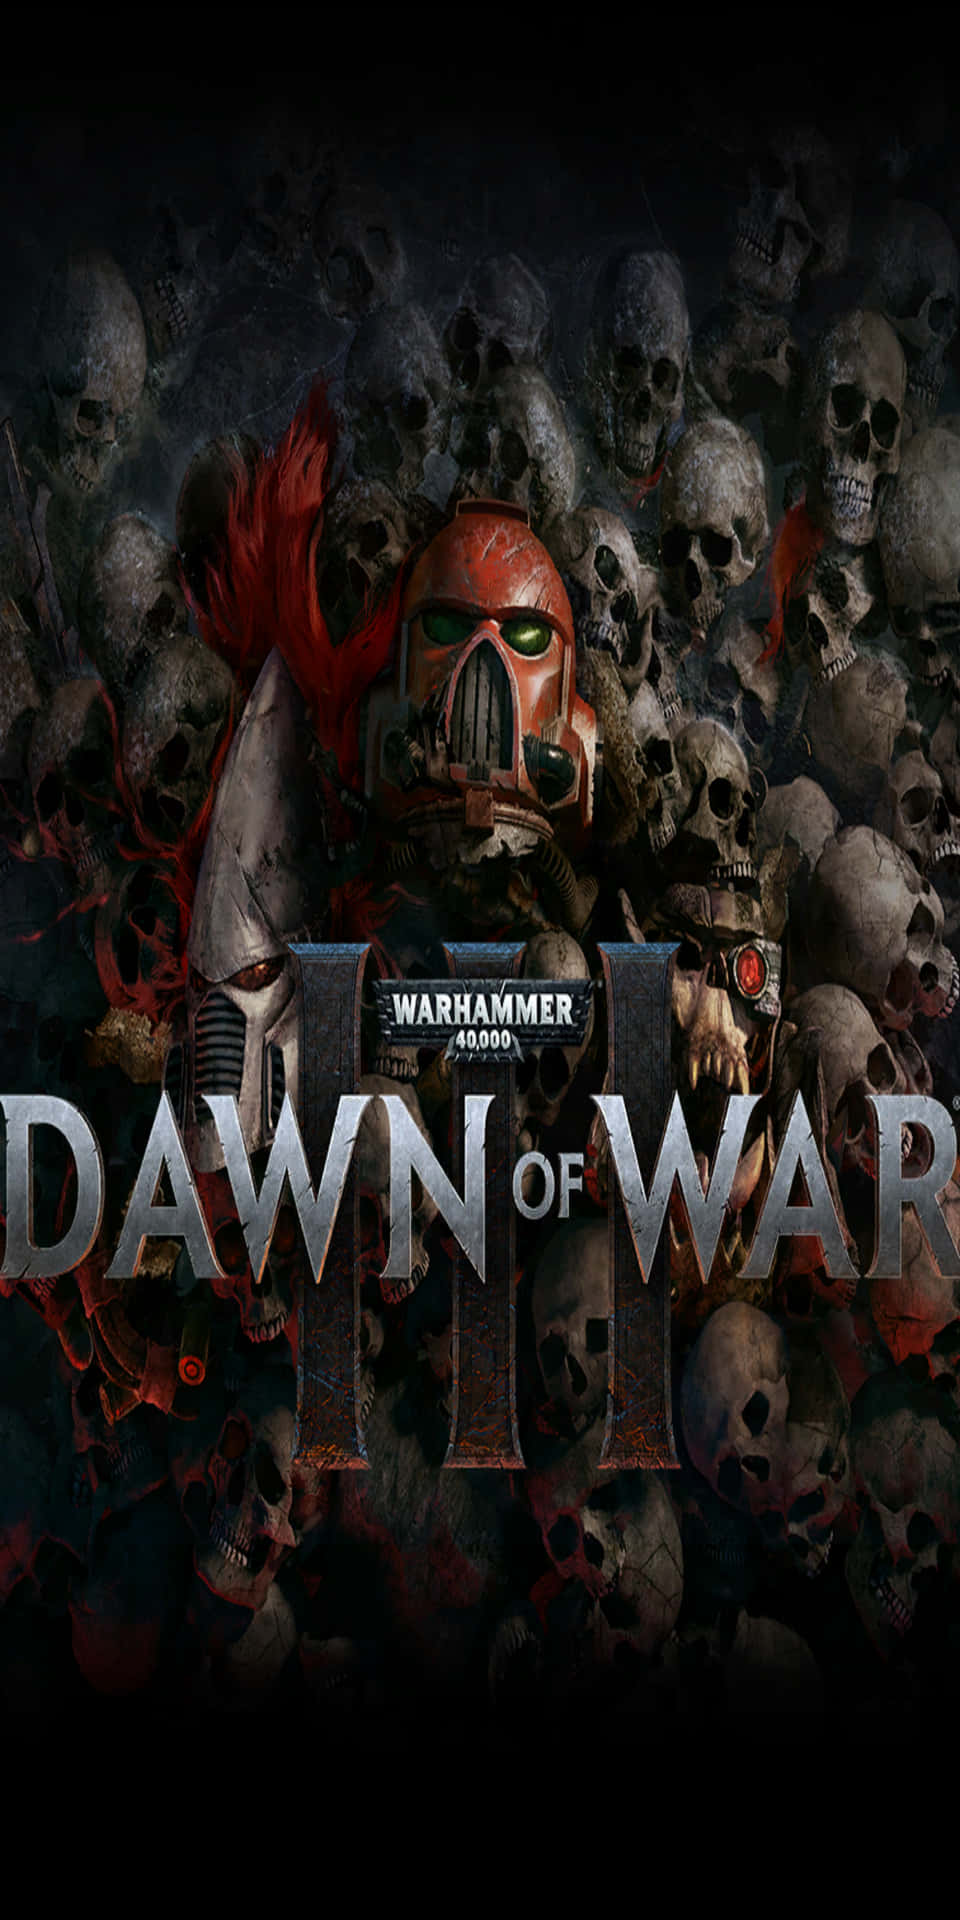 Join the fight with Pixel 3 and Dawn of War III